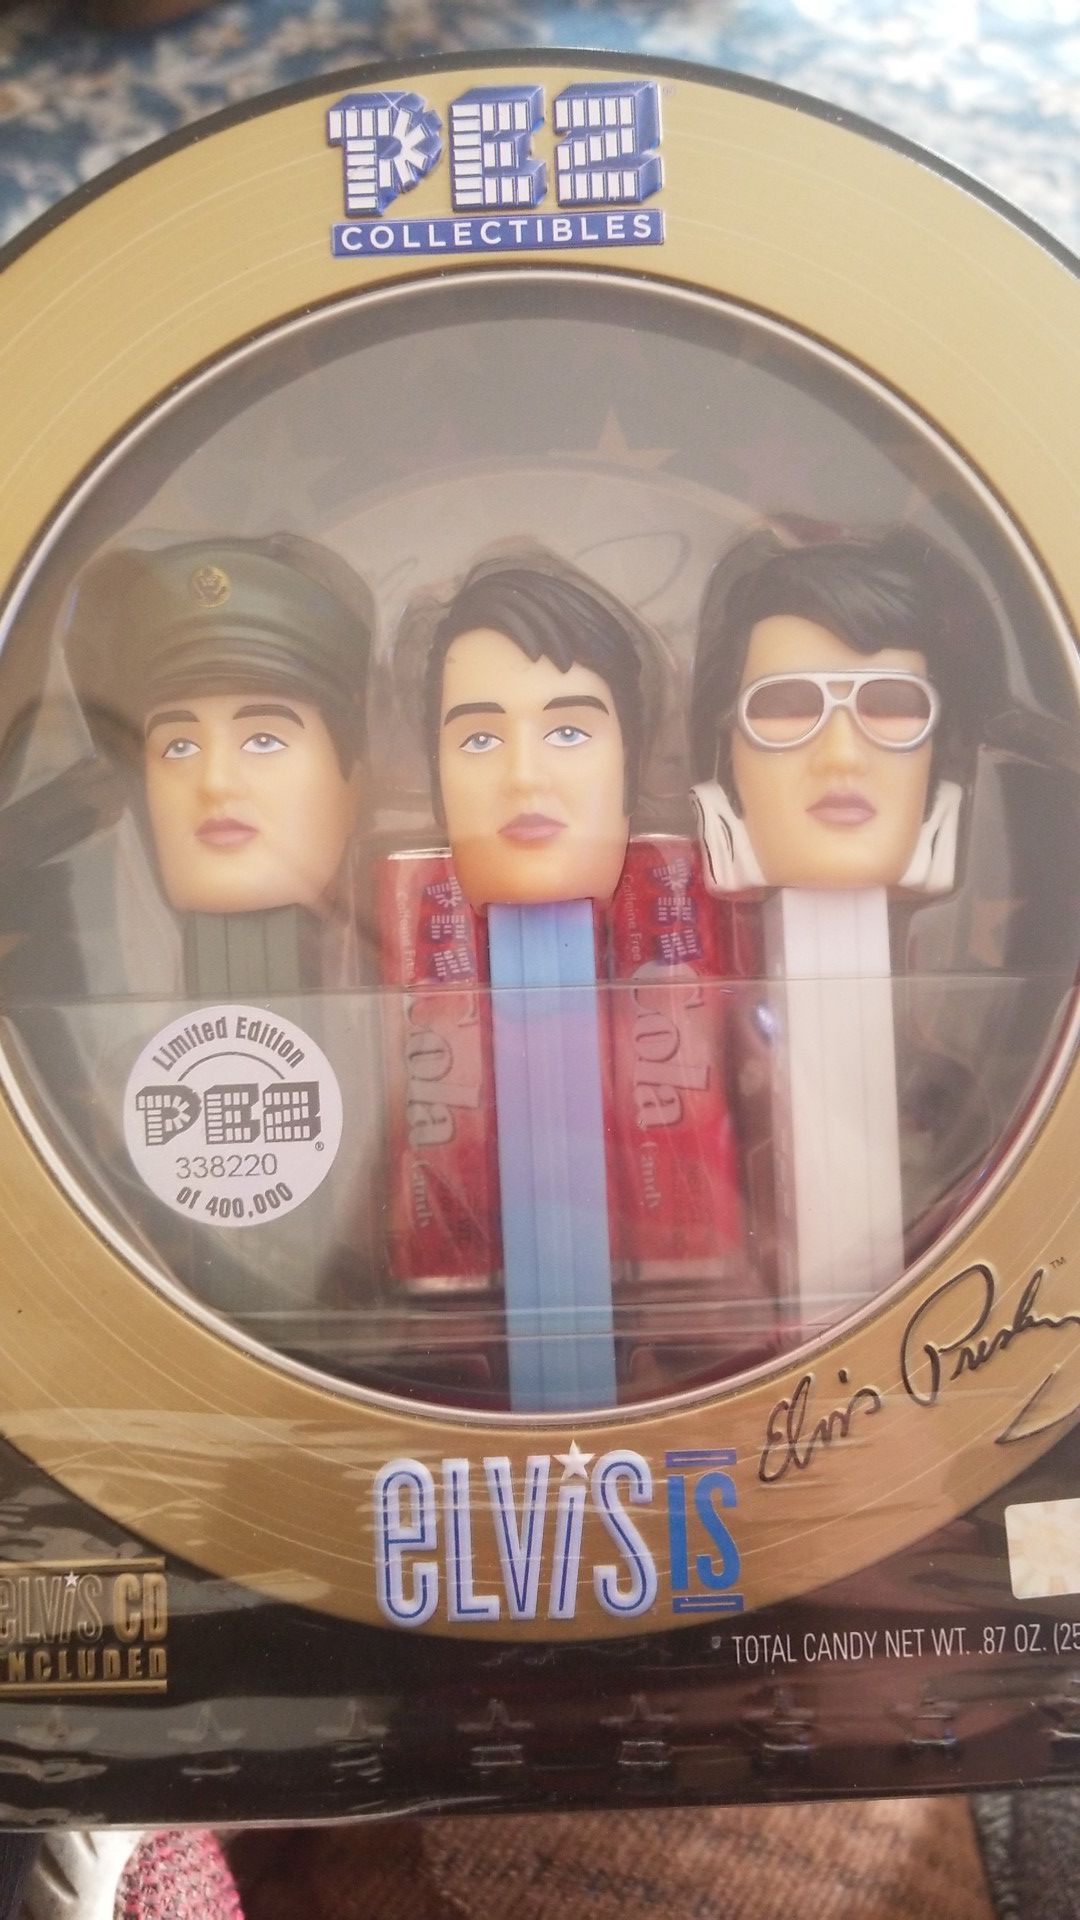 PEZ COLLECTION ELViS CD include